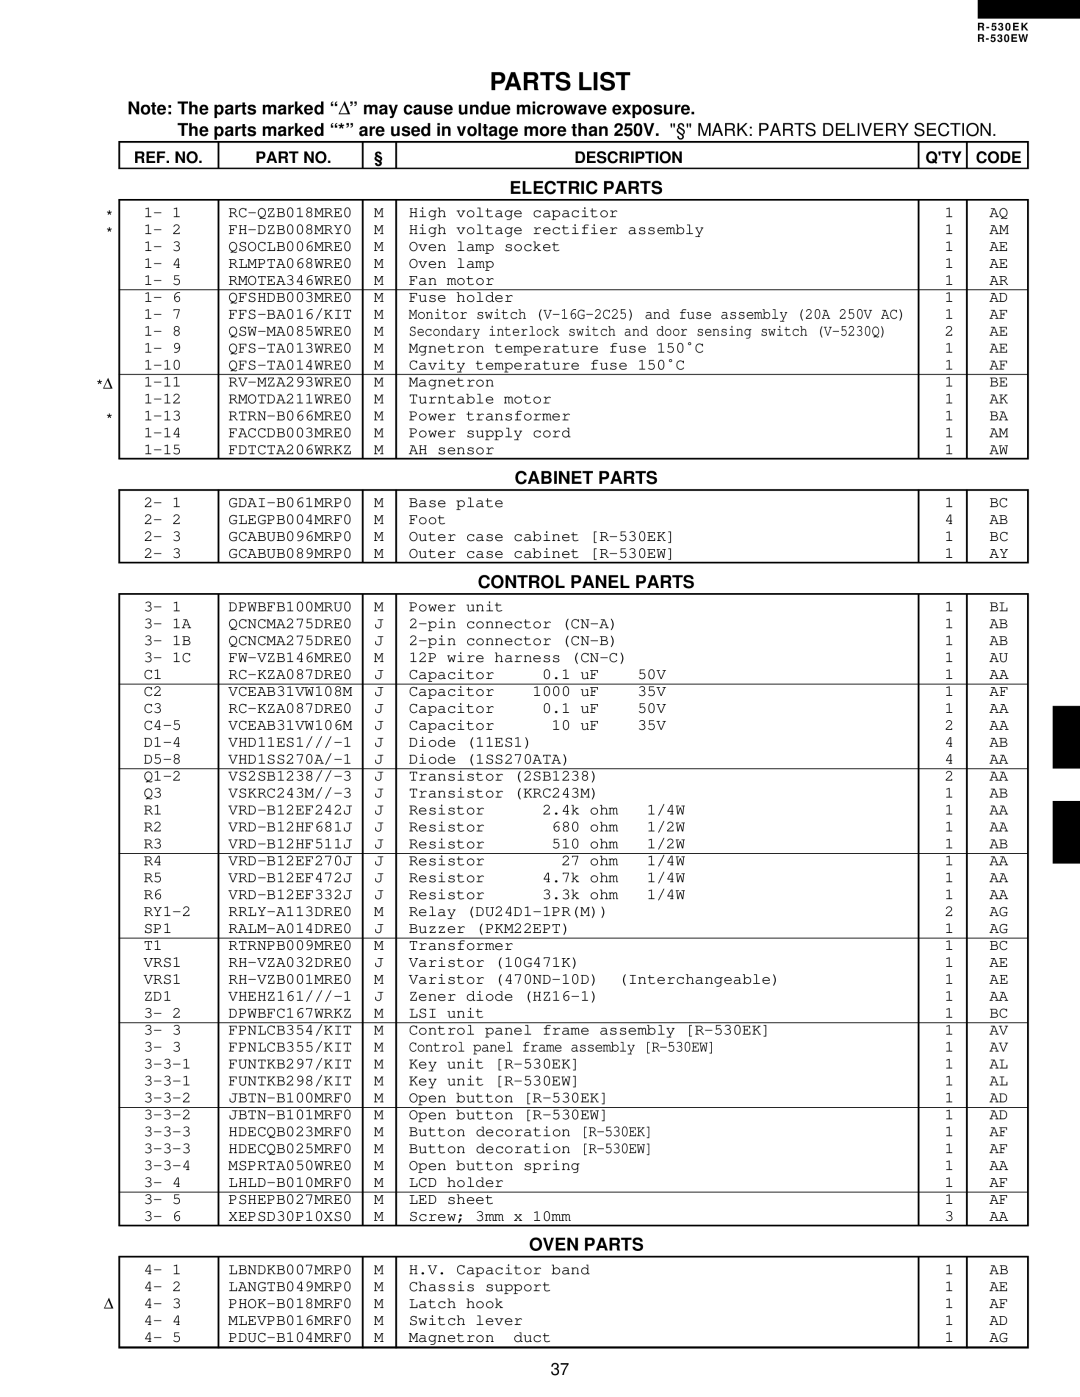 Sharp R-530EK Parts List, Note The parts marked “ Δ” may cause undue microwave exposure, Electric Parts, Cabinet Parts 